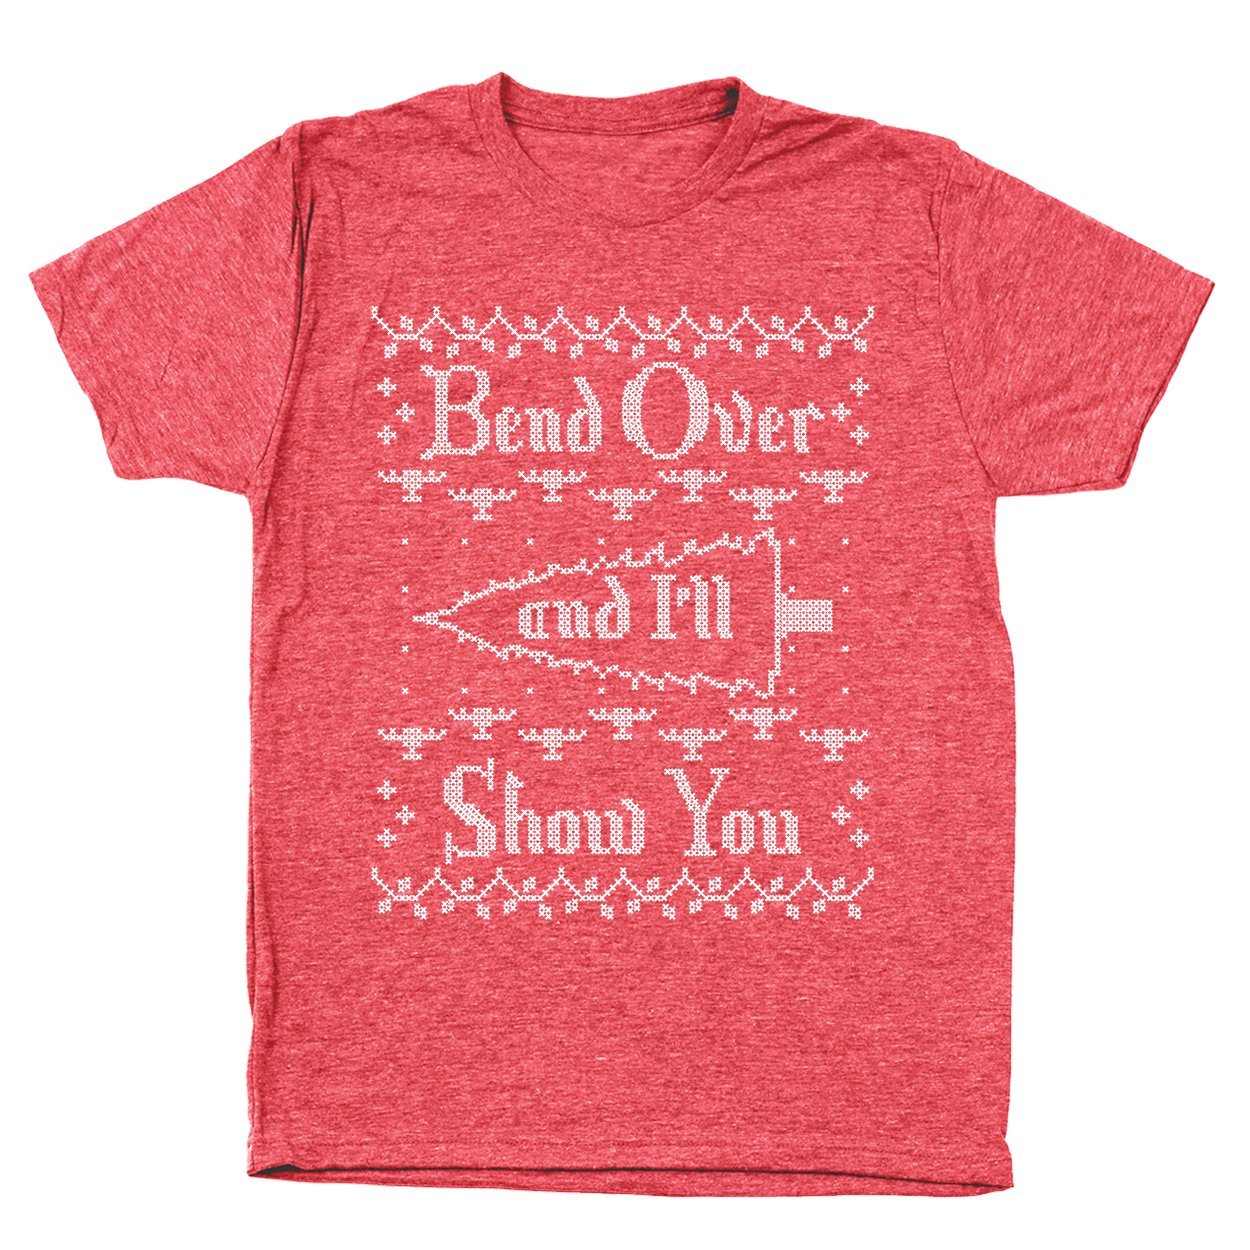 Bend Over And I'll Show You - DonkeyTees